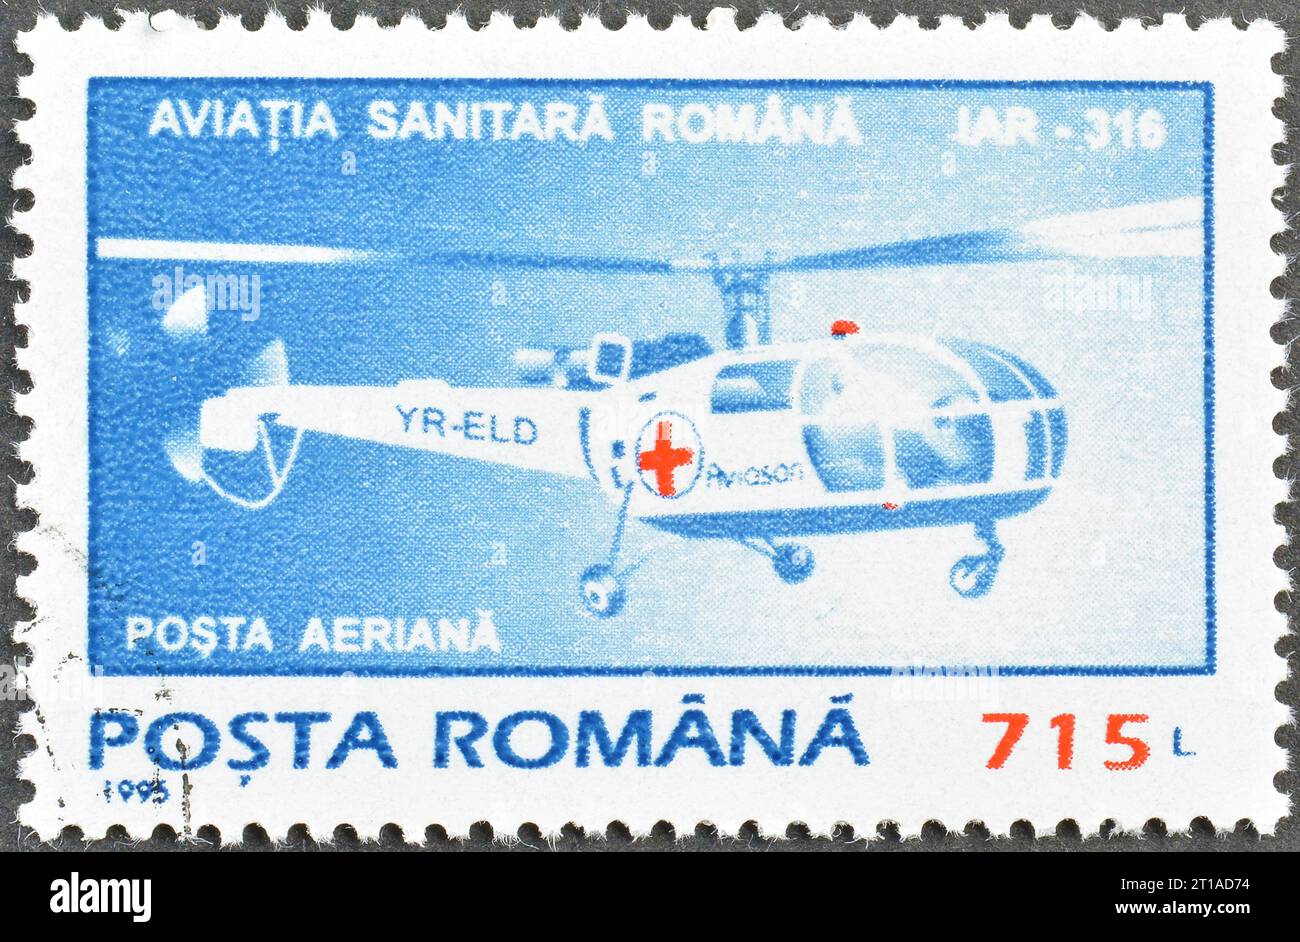 Cancelled postage stamp printed by Romania, that shows Emergency Helicopter IAR-316, circa 1995. Stock Photo